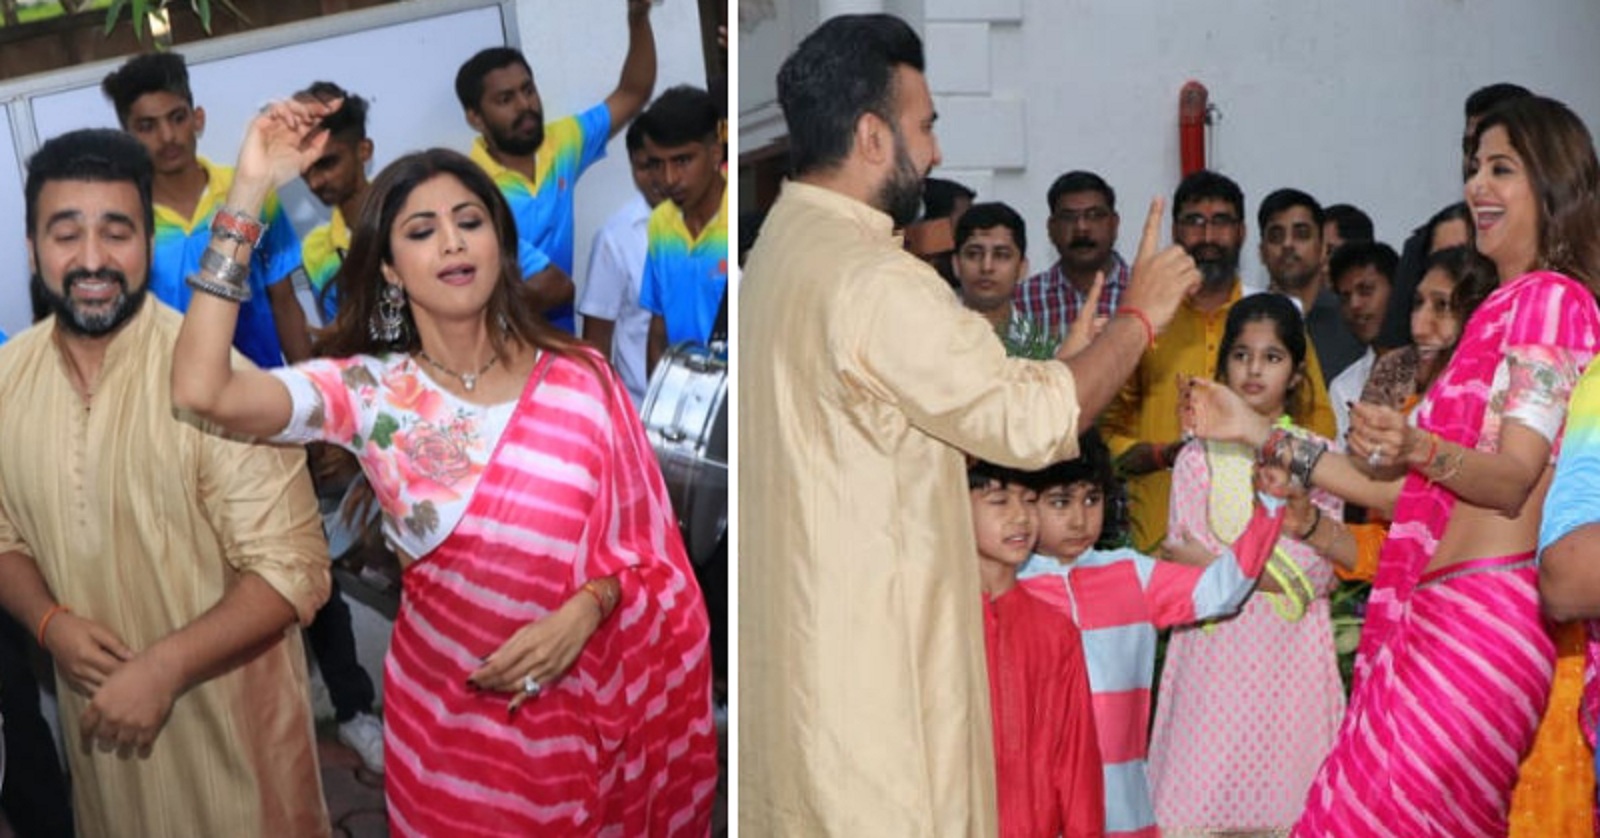 Watch: Shilpa Shetty Bids Farewell to Lord Ganesha with Loads of Singing and Dancing!